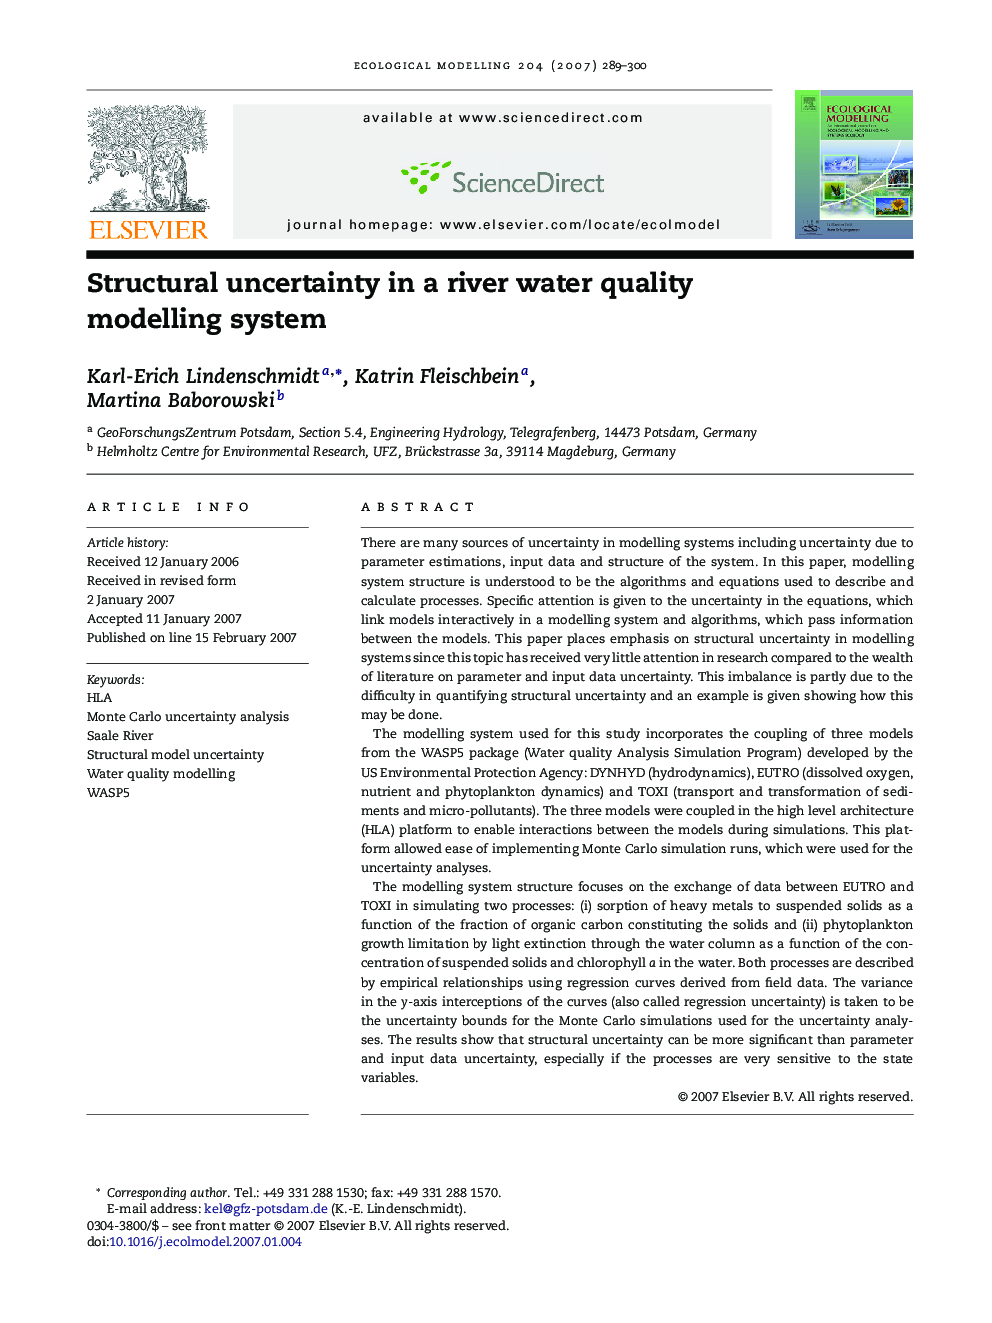 Structural uncertainty in a river water quality modelling system